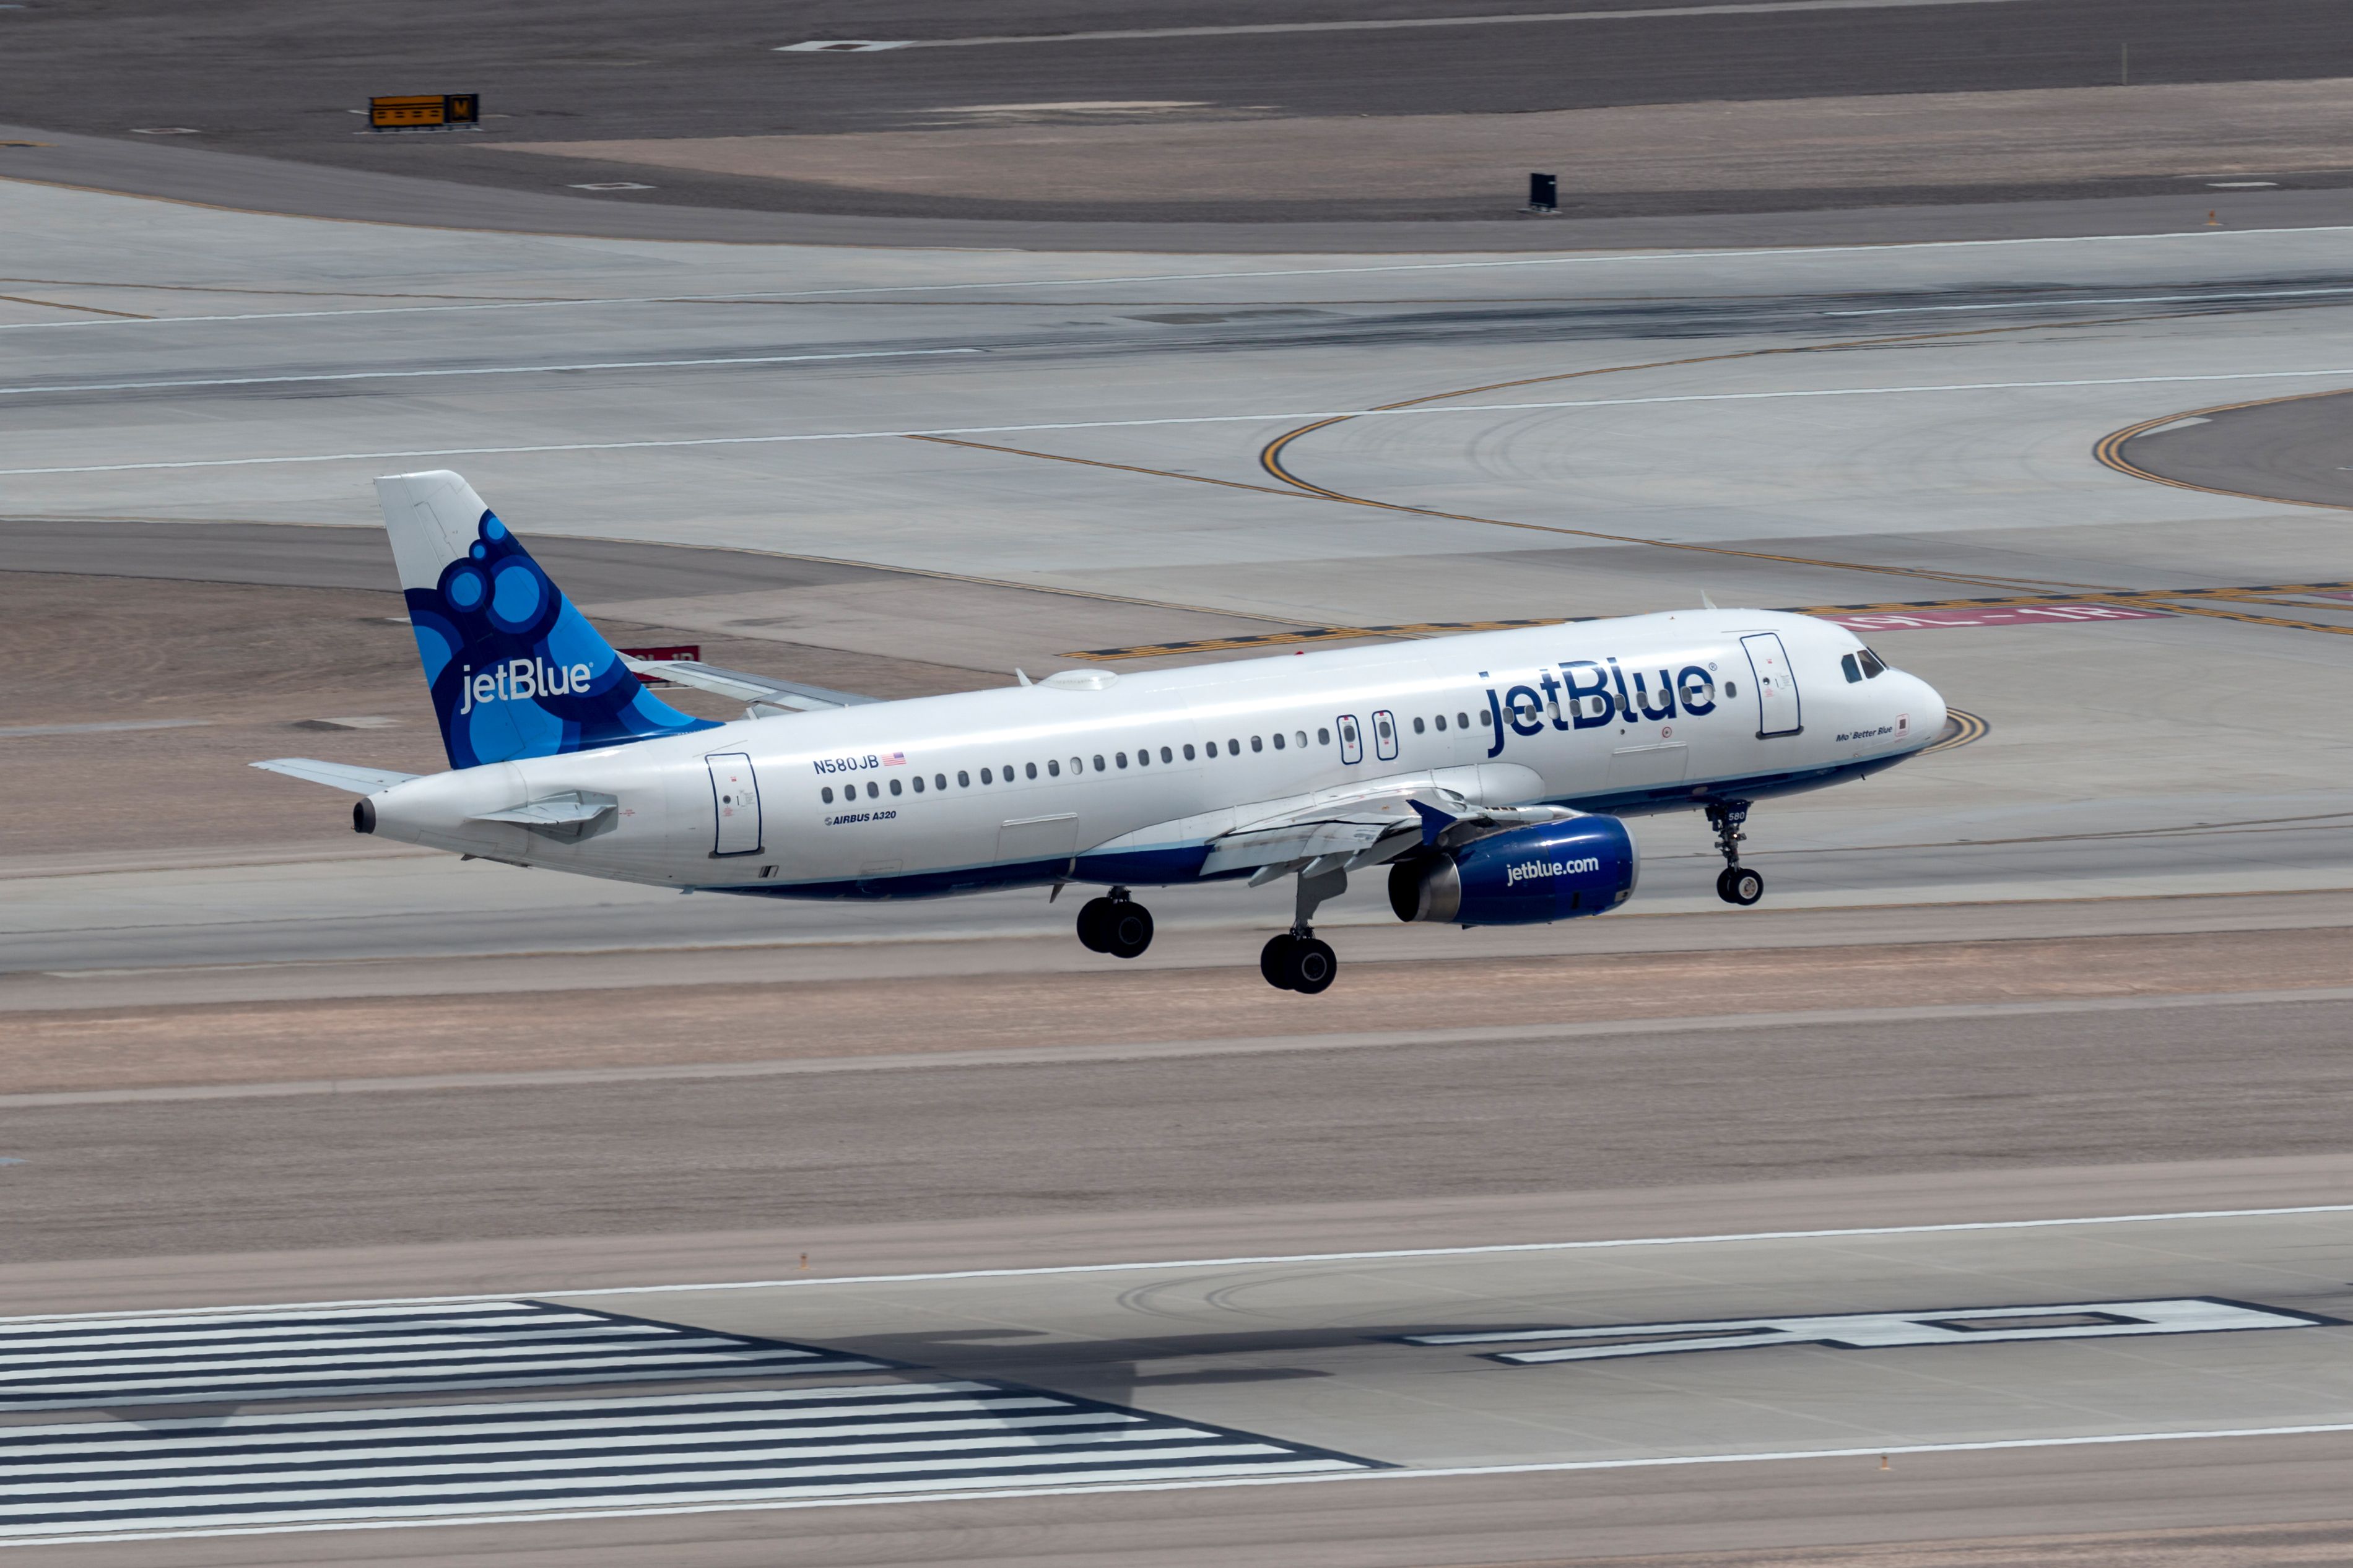 A JetBlue Airbus A320 about to land.